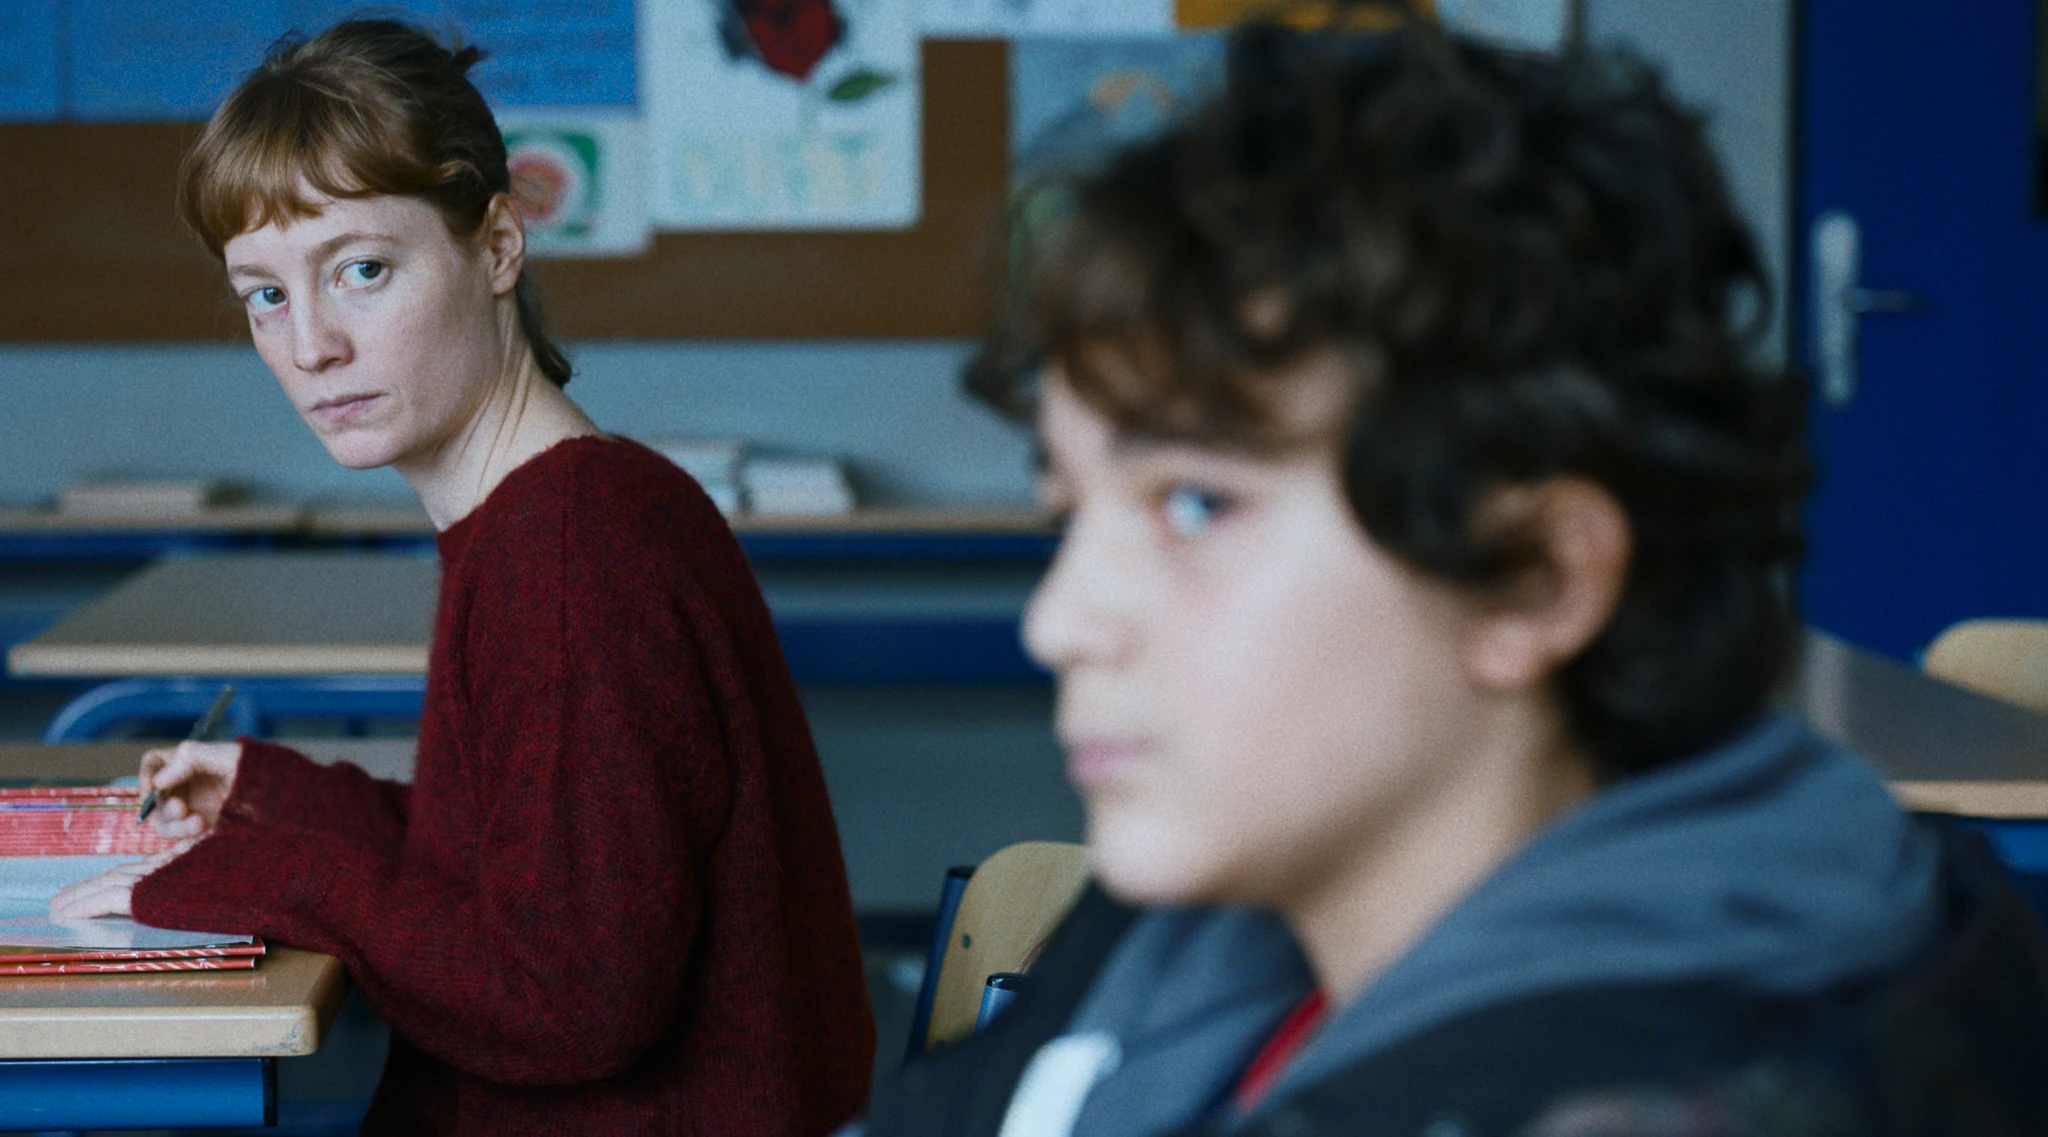 'The Teachers' Lounge' Director İlker Çatak on the Power of Defiance (Exclusive)